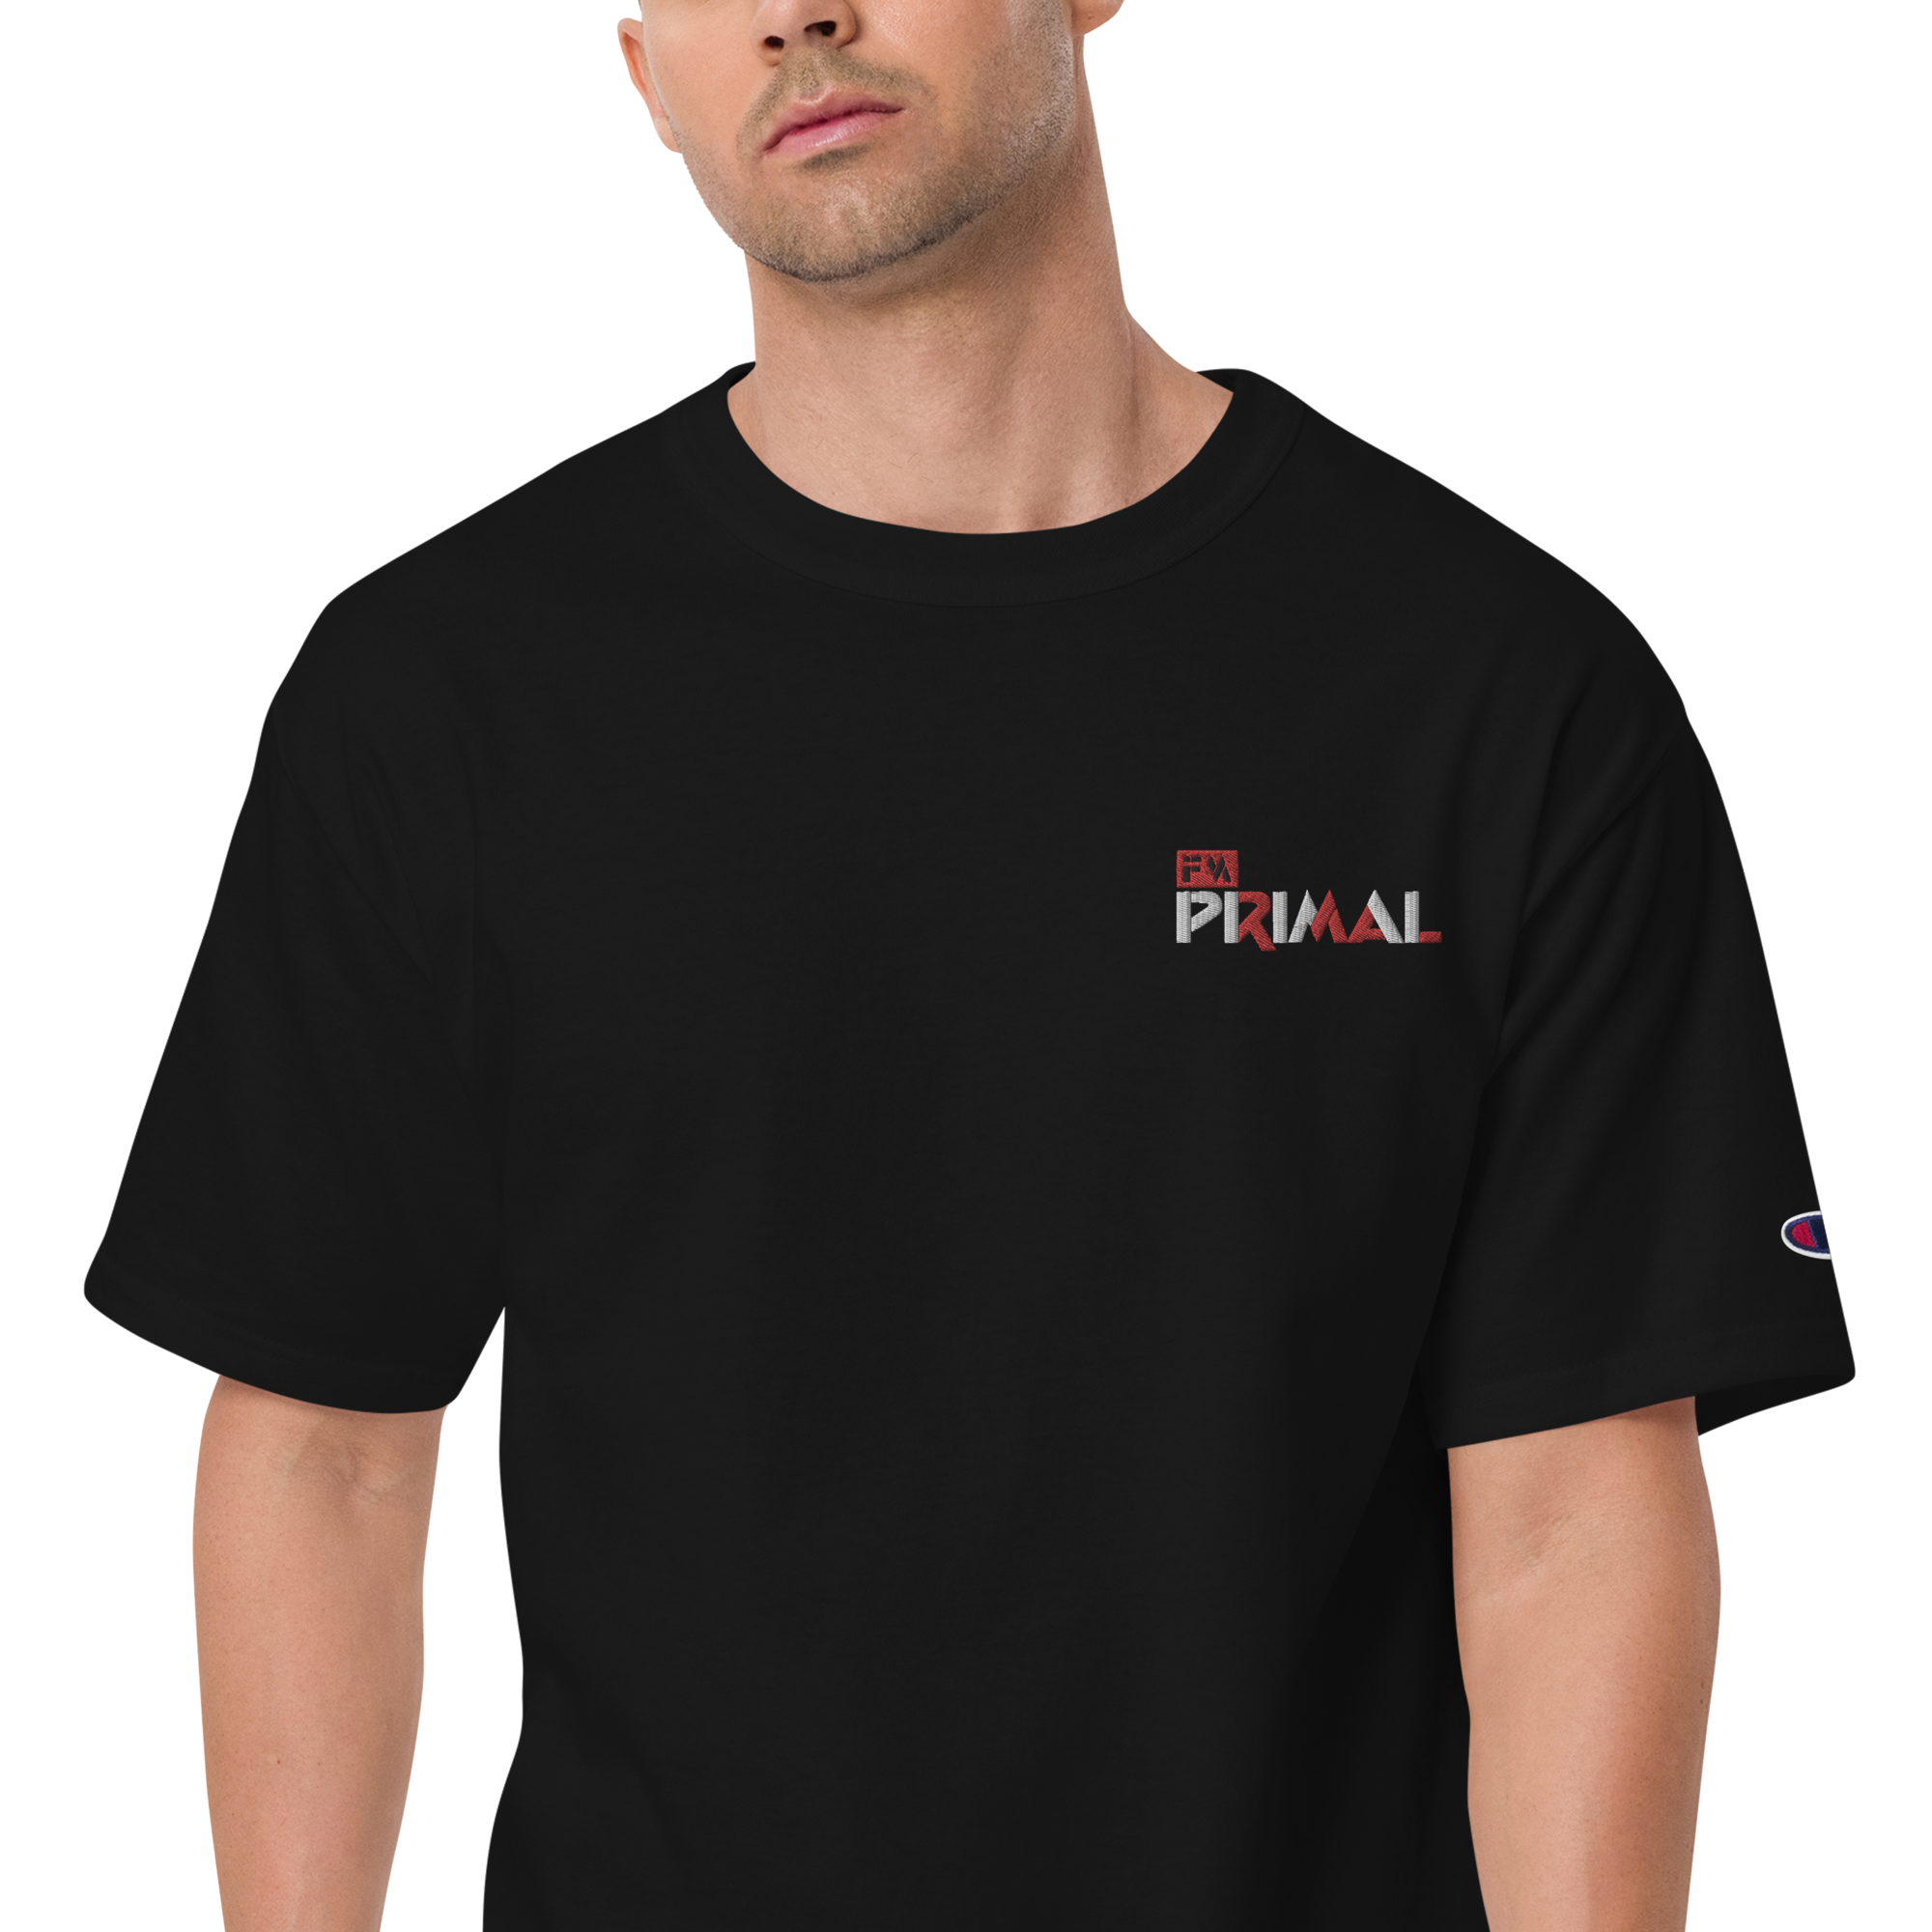 mens-champion-t-shirt-black-zoomed-in-646a5934d70ac.png